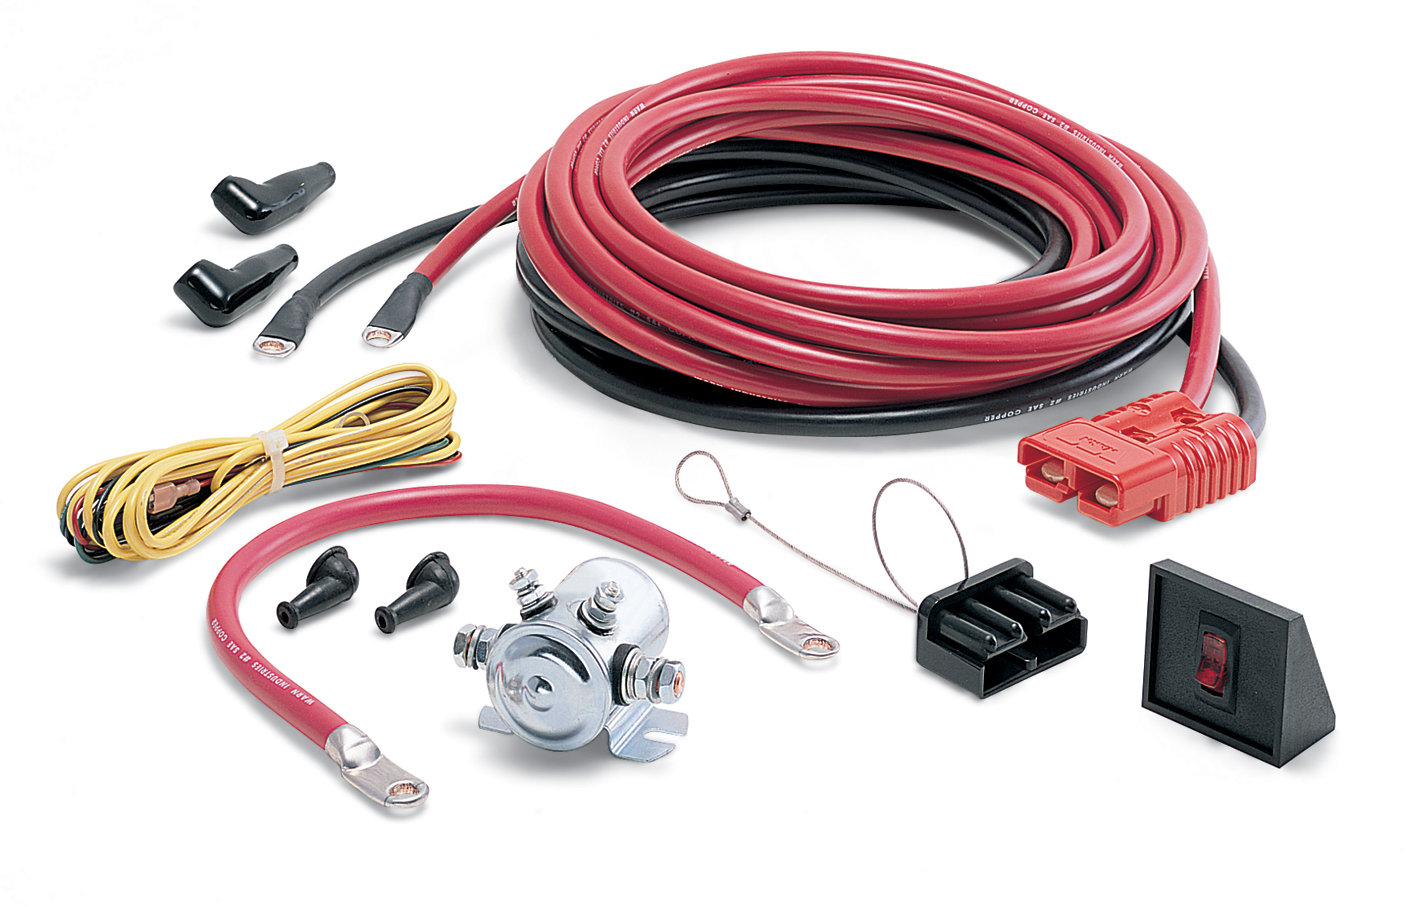 WARN Quick Connect Kits for Rear Mounting of Portable Winch | Quadratec